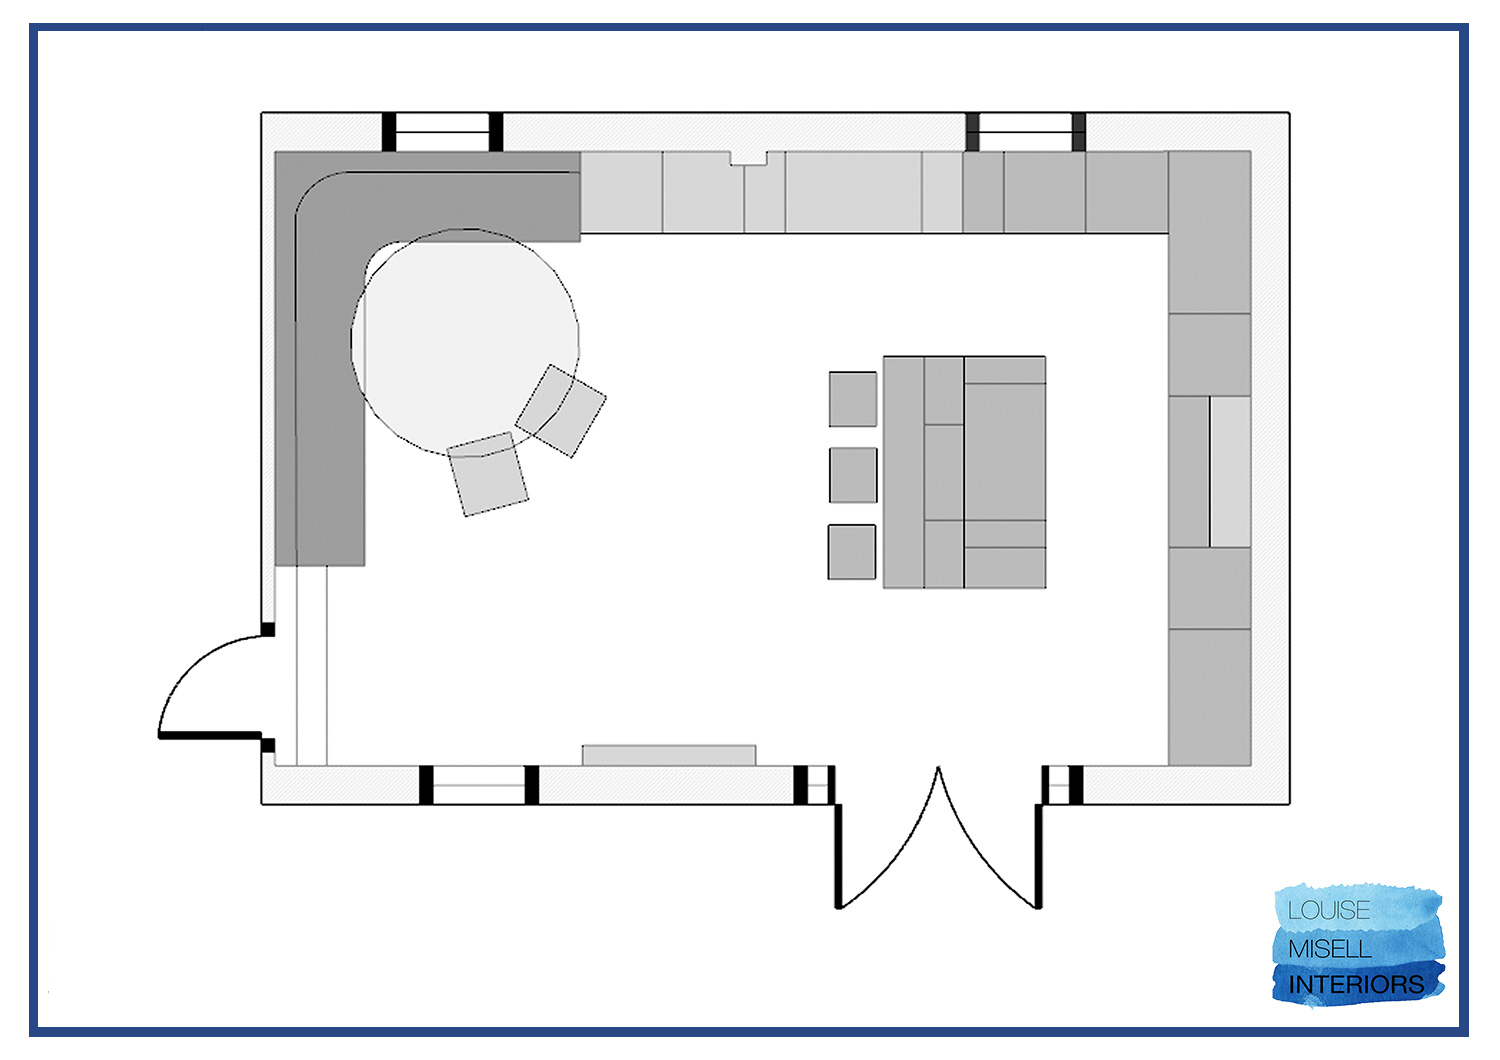 The floorplan of the proposed new layout for the kitchen.